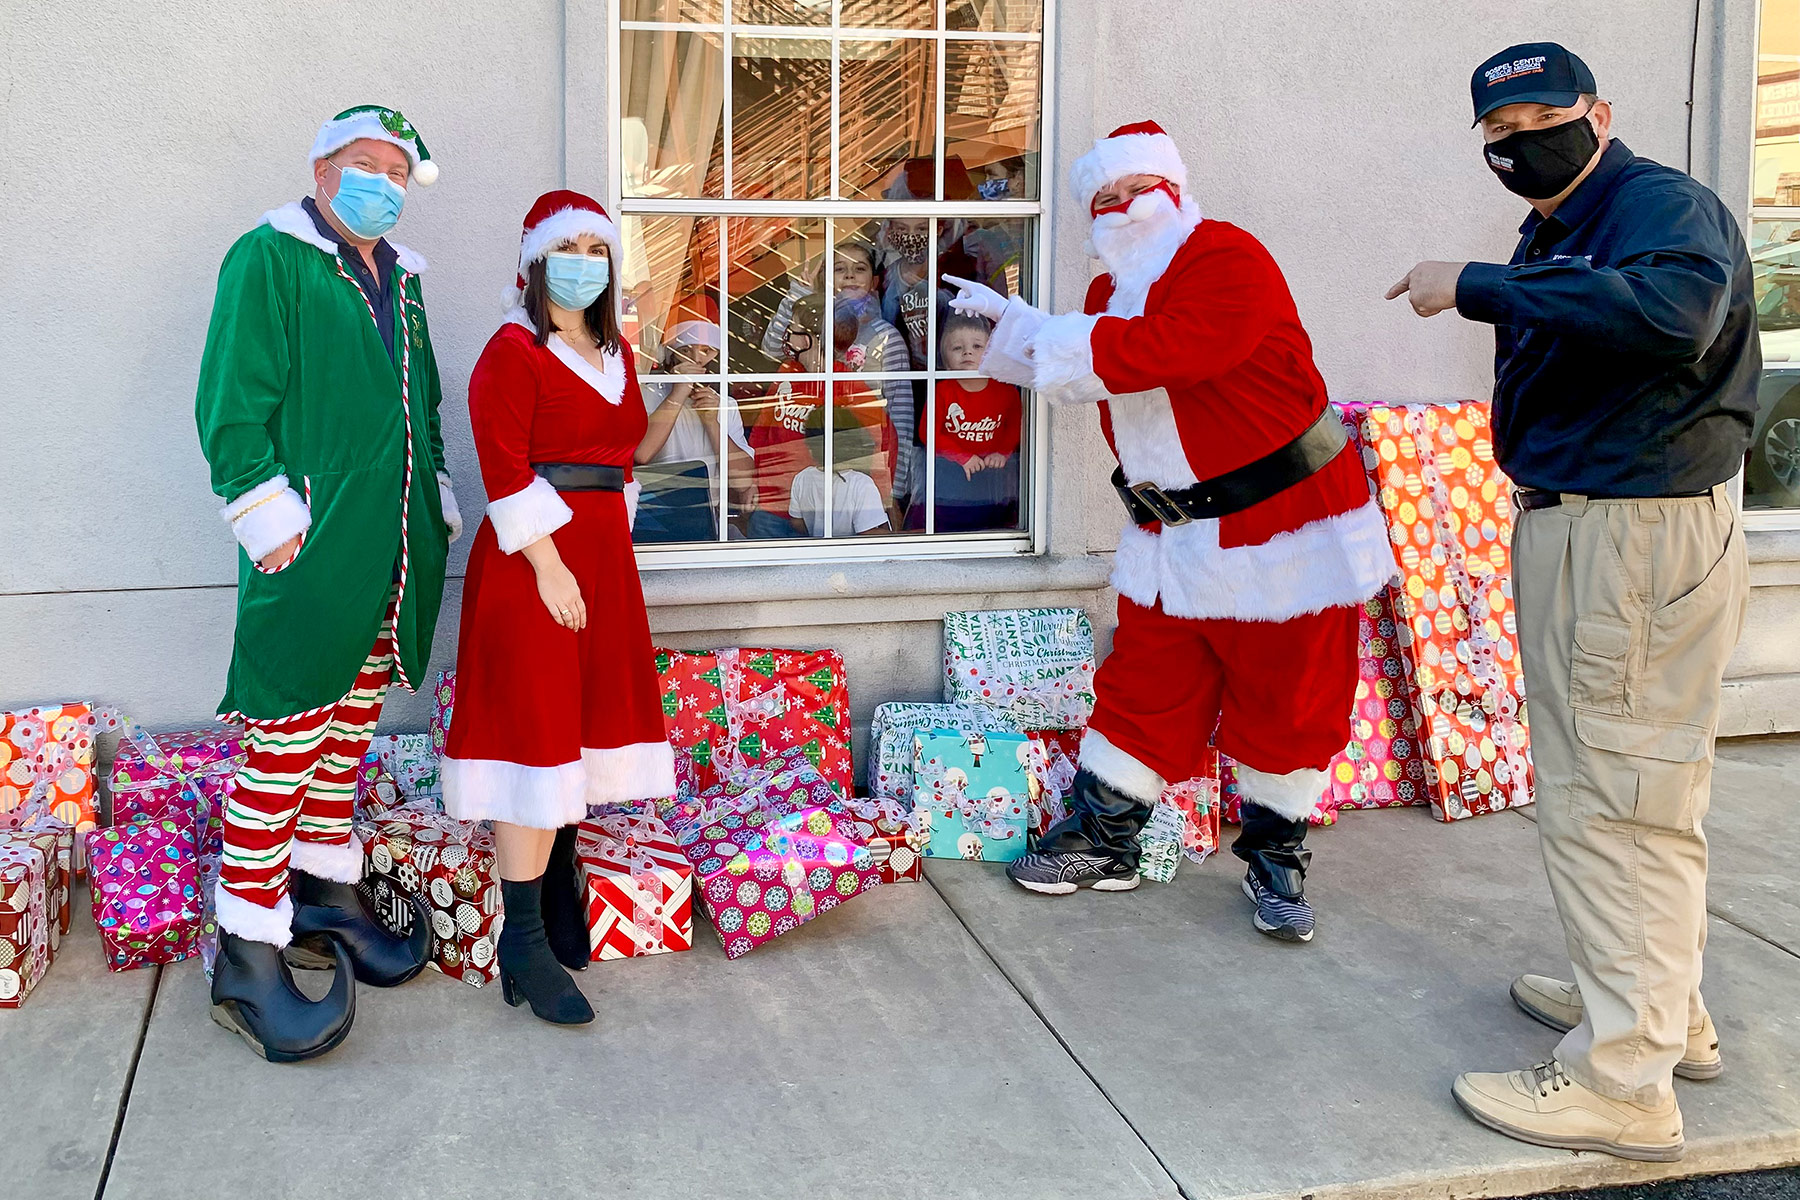 Journey crew delivering presents to GCRM kids